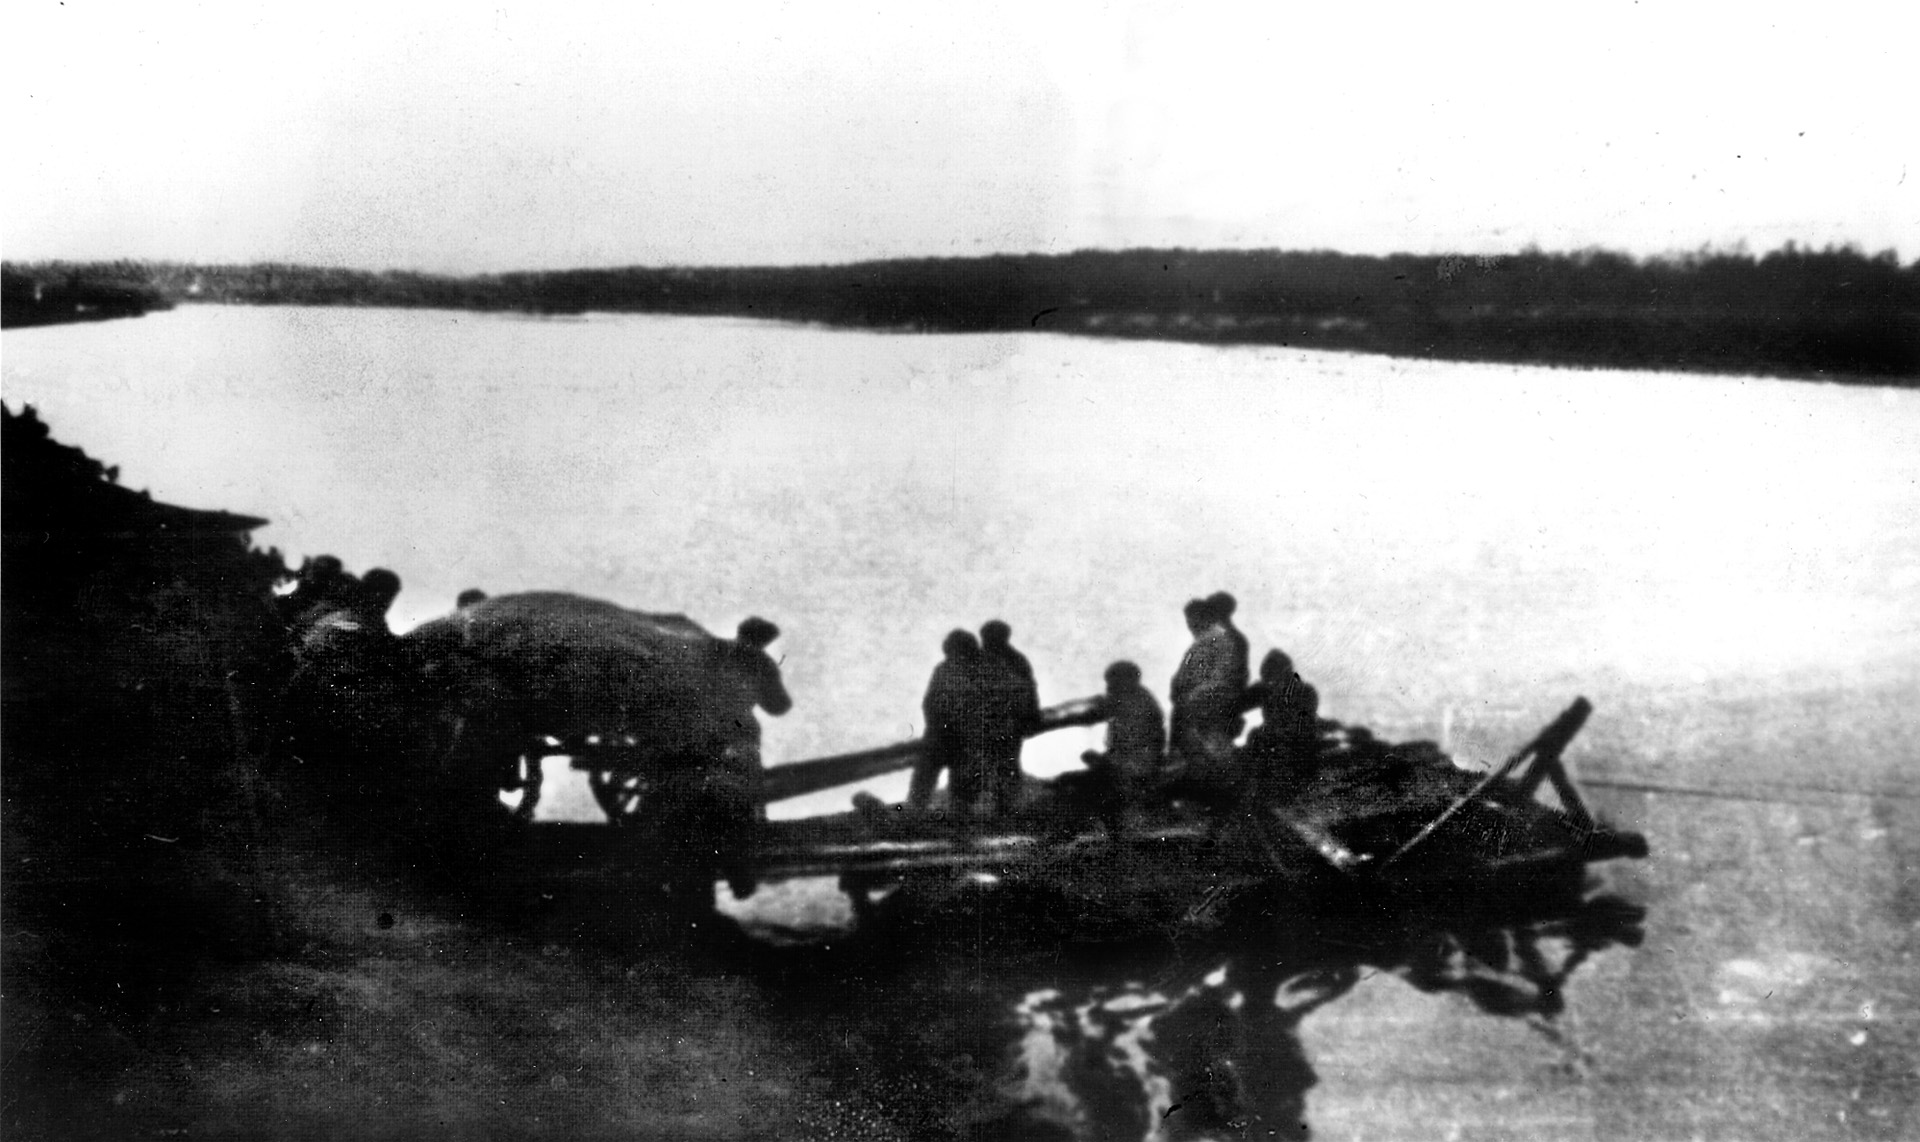 In the first photo taken of Red Army soldiers in Romania, Soviet troops cross the Pruth River.